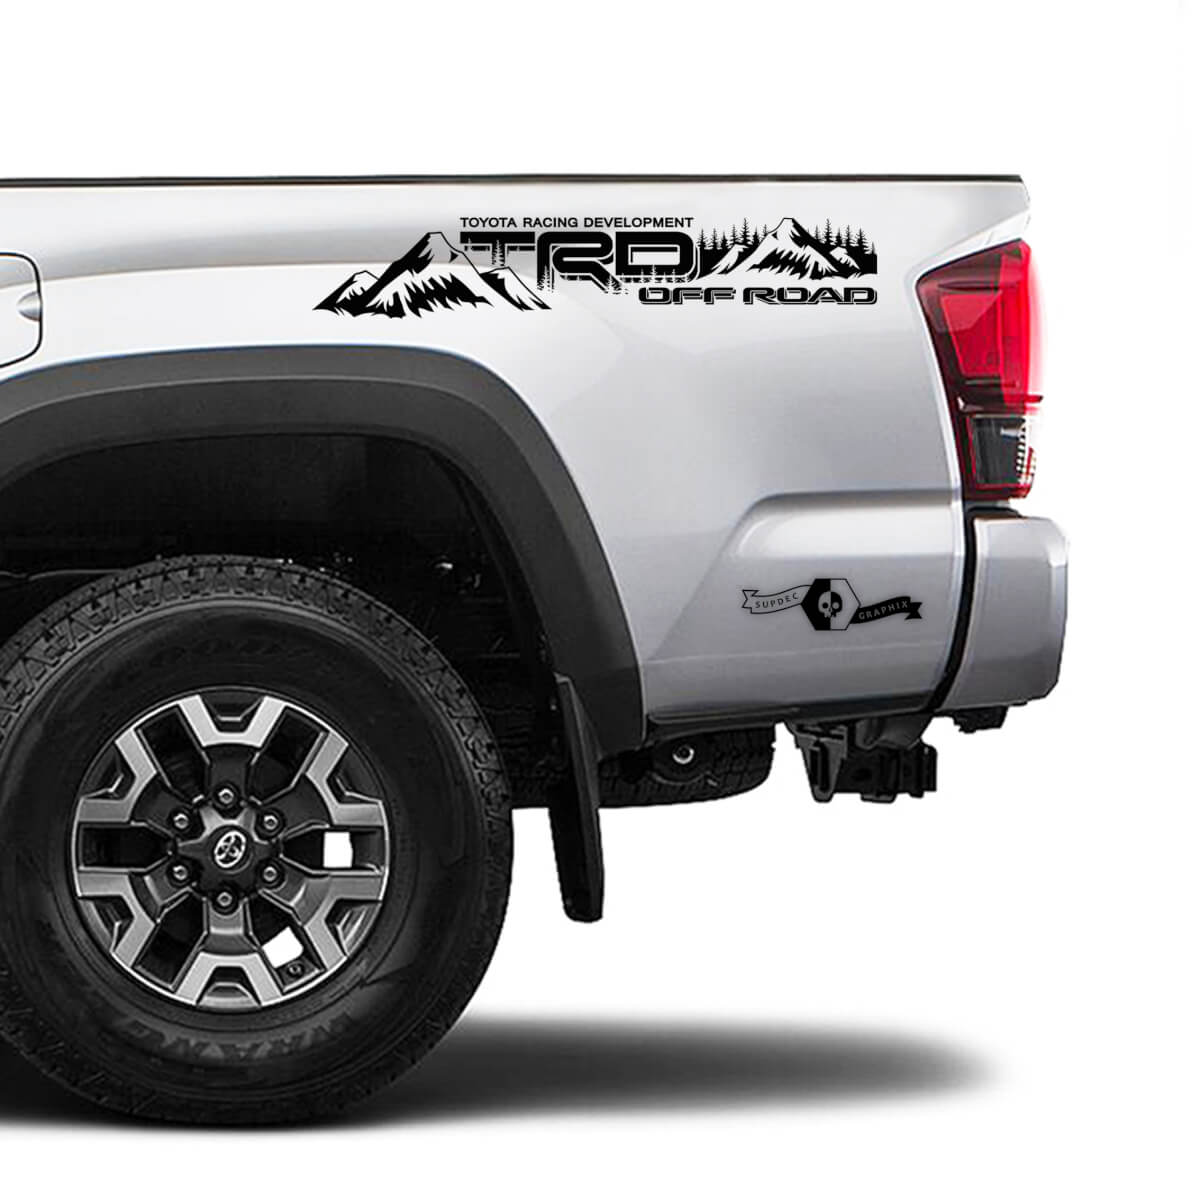 TRD 4x4 Off Road TOYOTA Forest Mountains Decals Stickers fit Tacoma Tundra 4Runner Hilux side